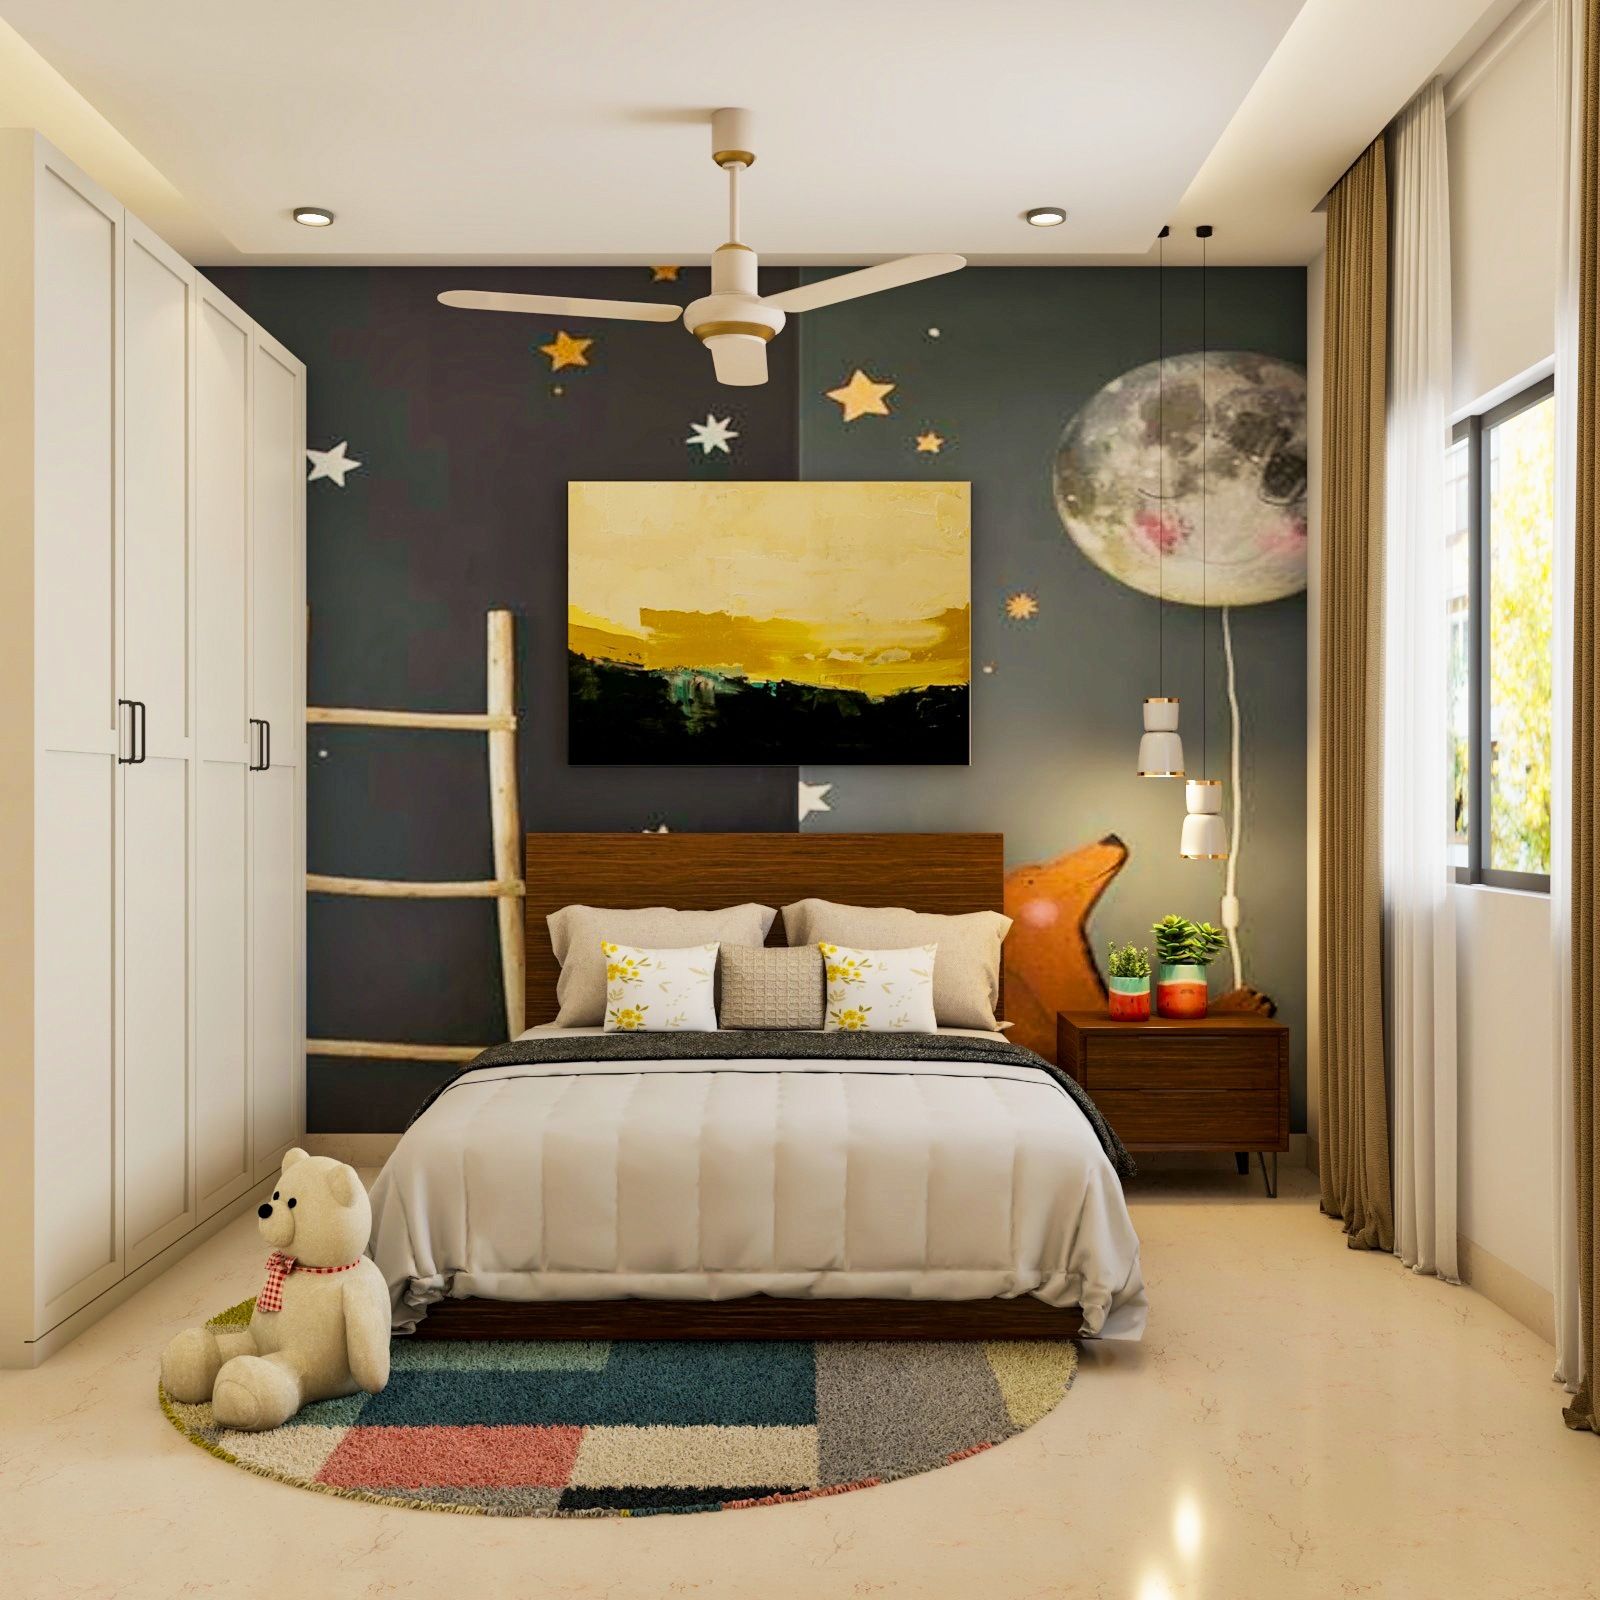 Modern Kids Room Design With A Wooden Queen Size Bed And Swing Wardrobe